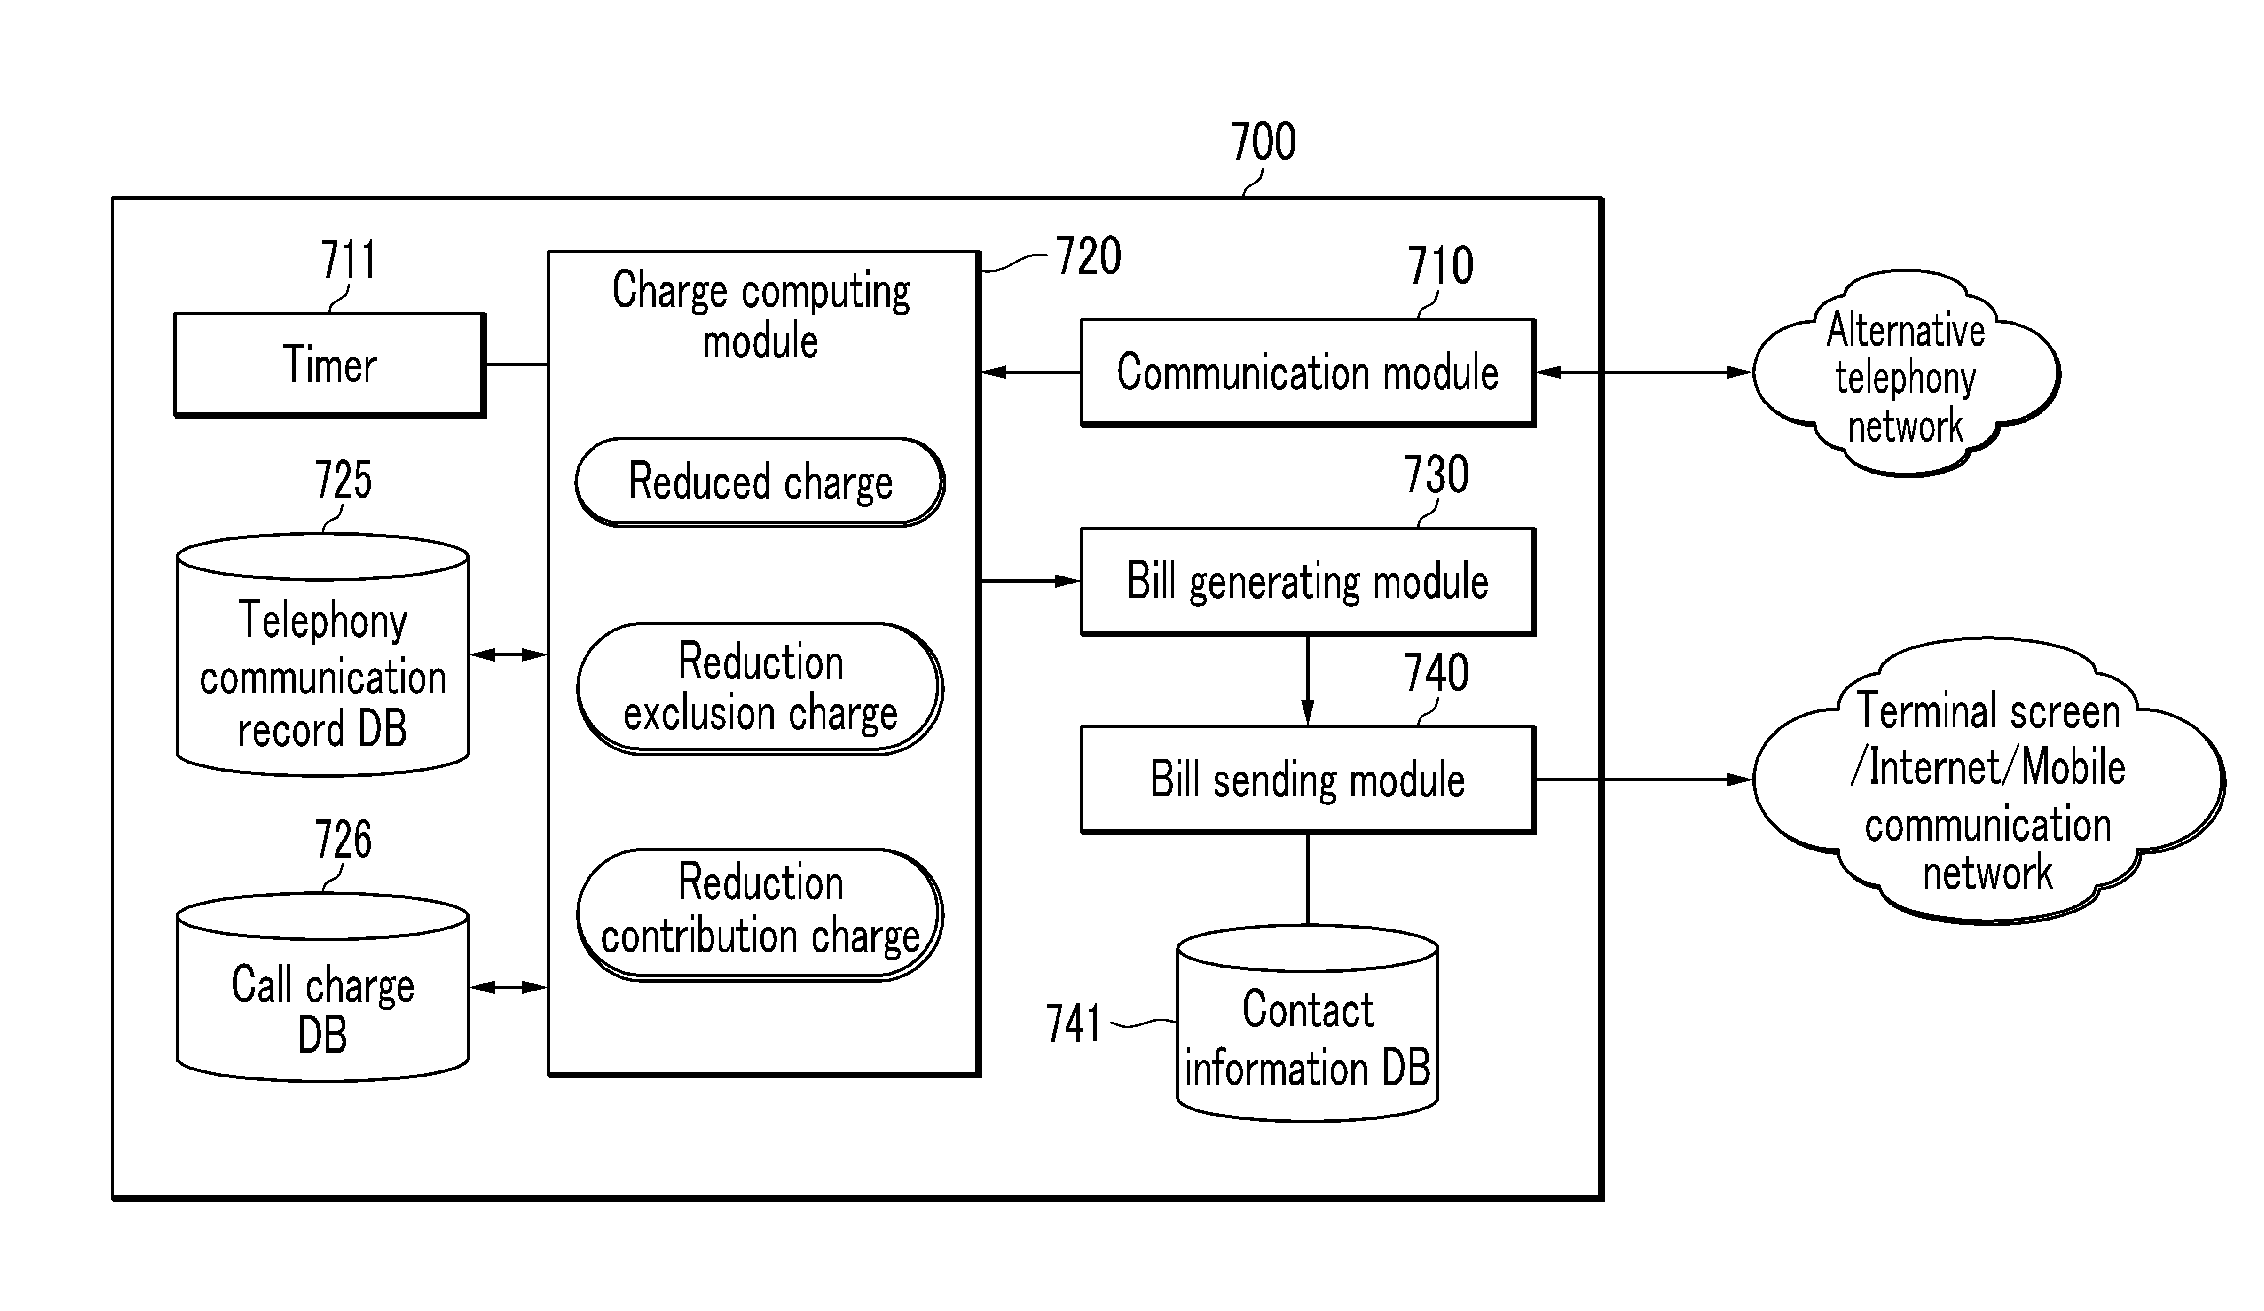 Method and apparatus for providing alternative telephony service, and method of computing inverse call charge using the same